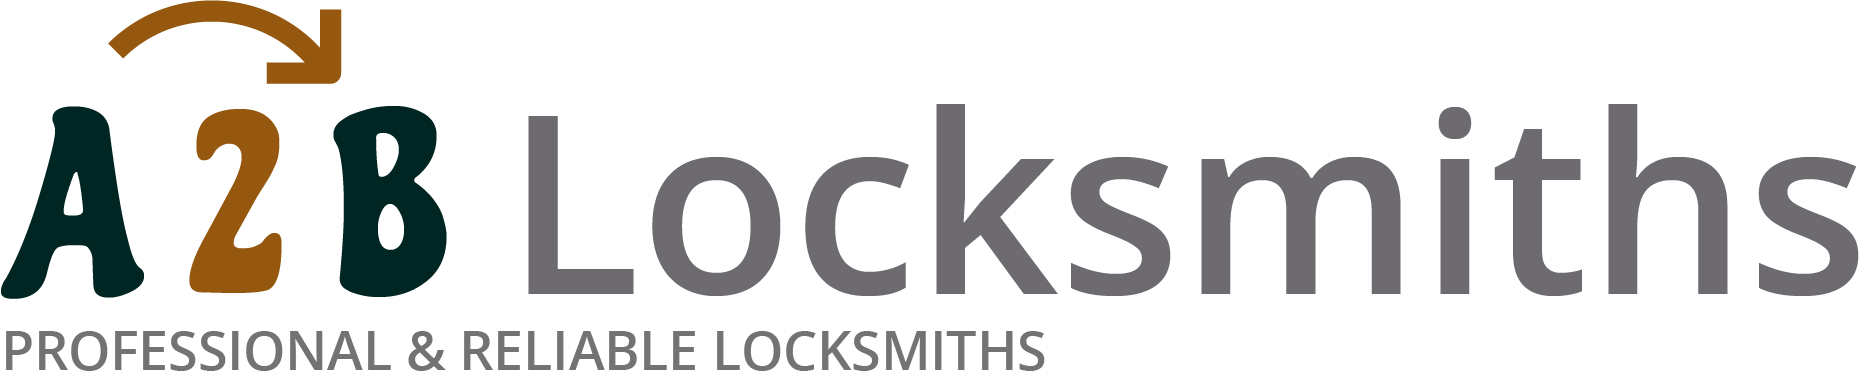 If you are locked out of house in Lowestoft, our 24/7 local emergency locksmith services can help you.